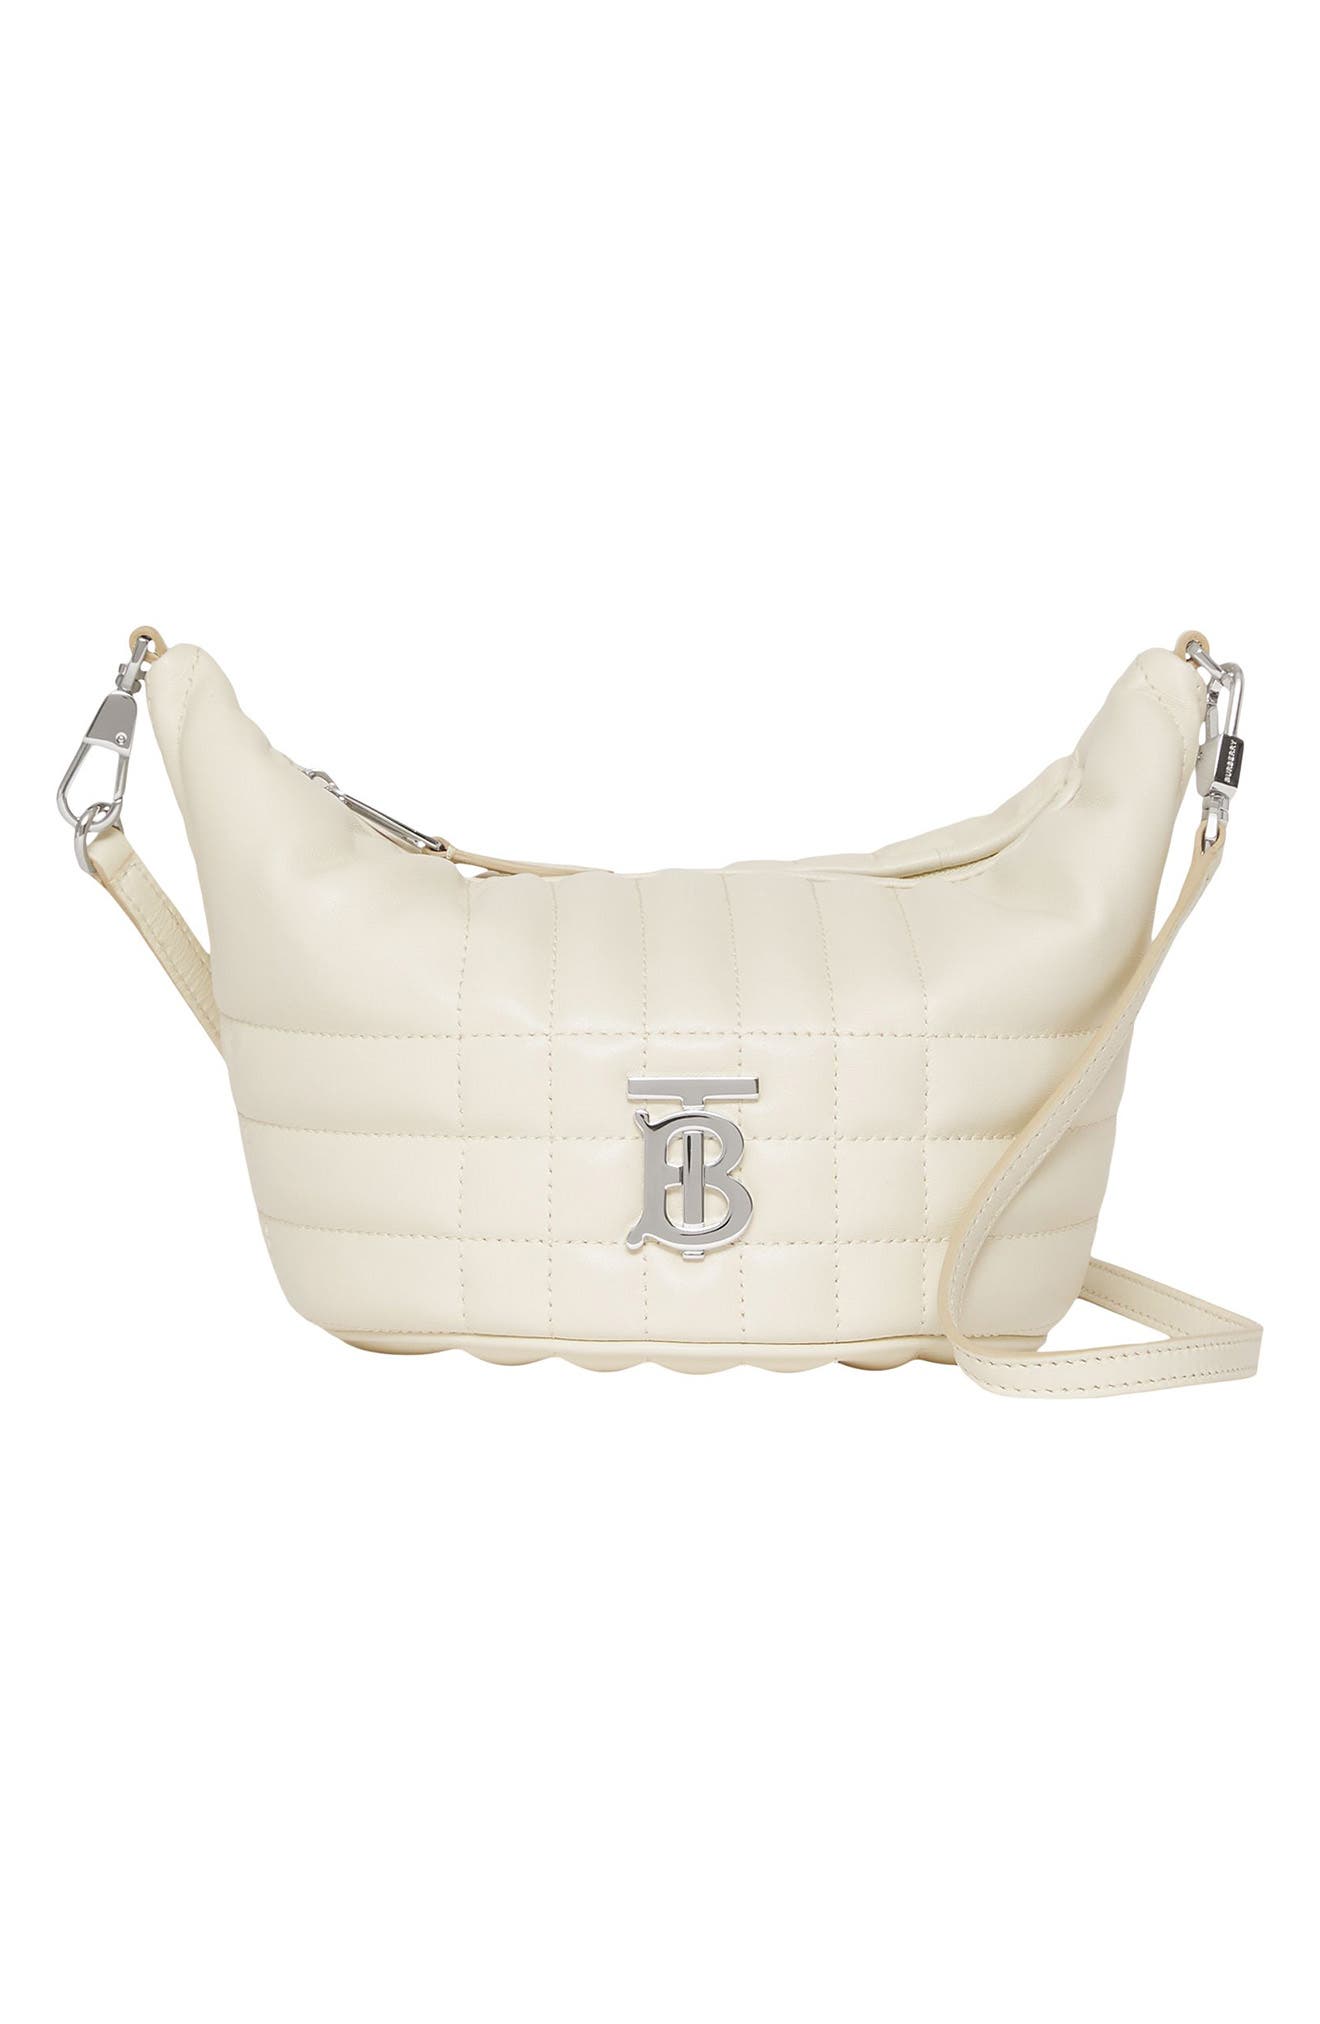 Burberry Mini Lotus Check Quilted Leather Convertible Crescent Bag in Pale Vanilla at Nordstrom